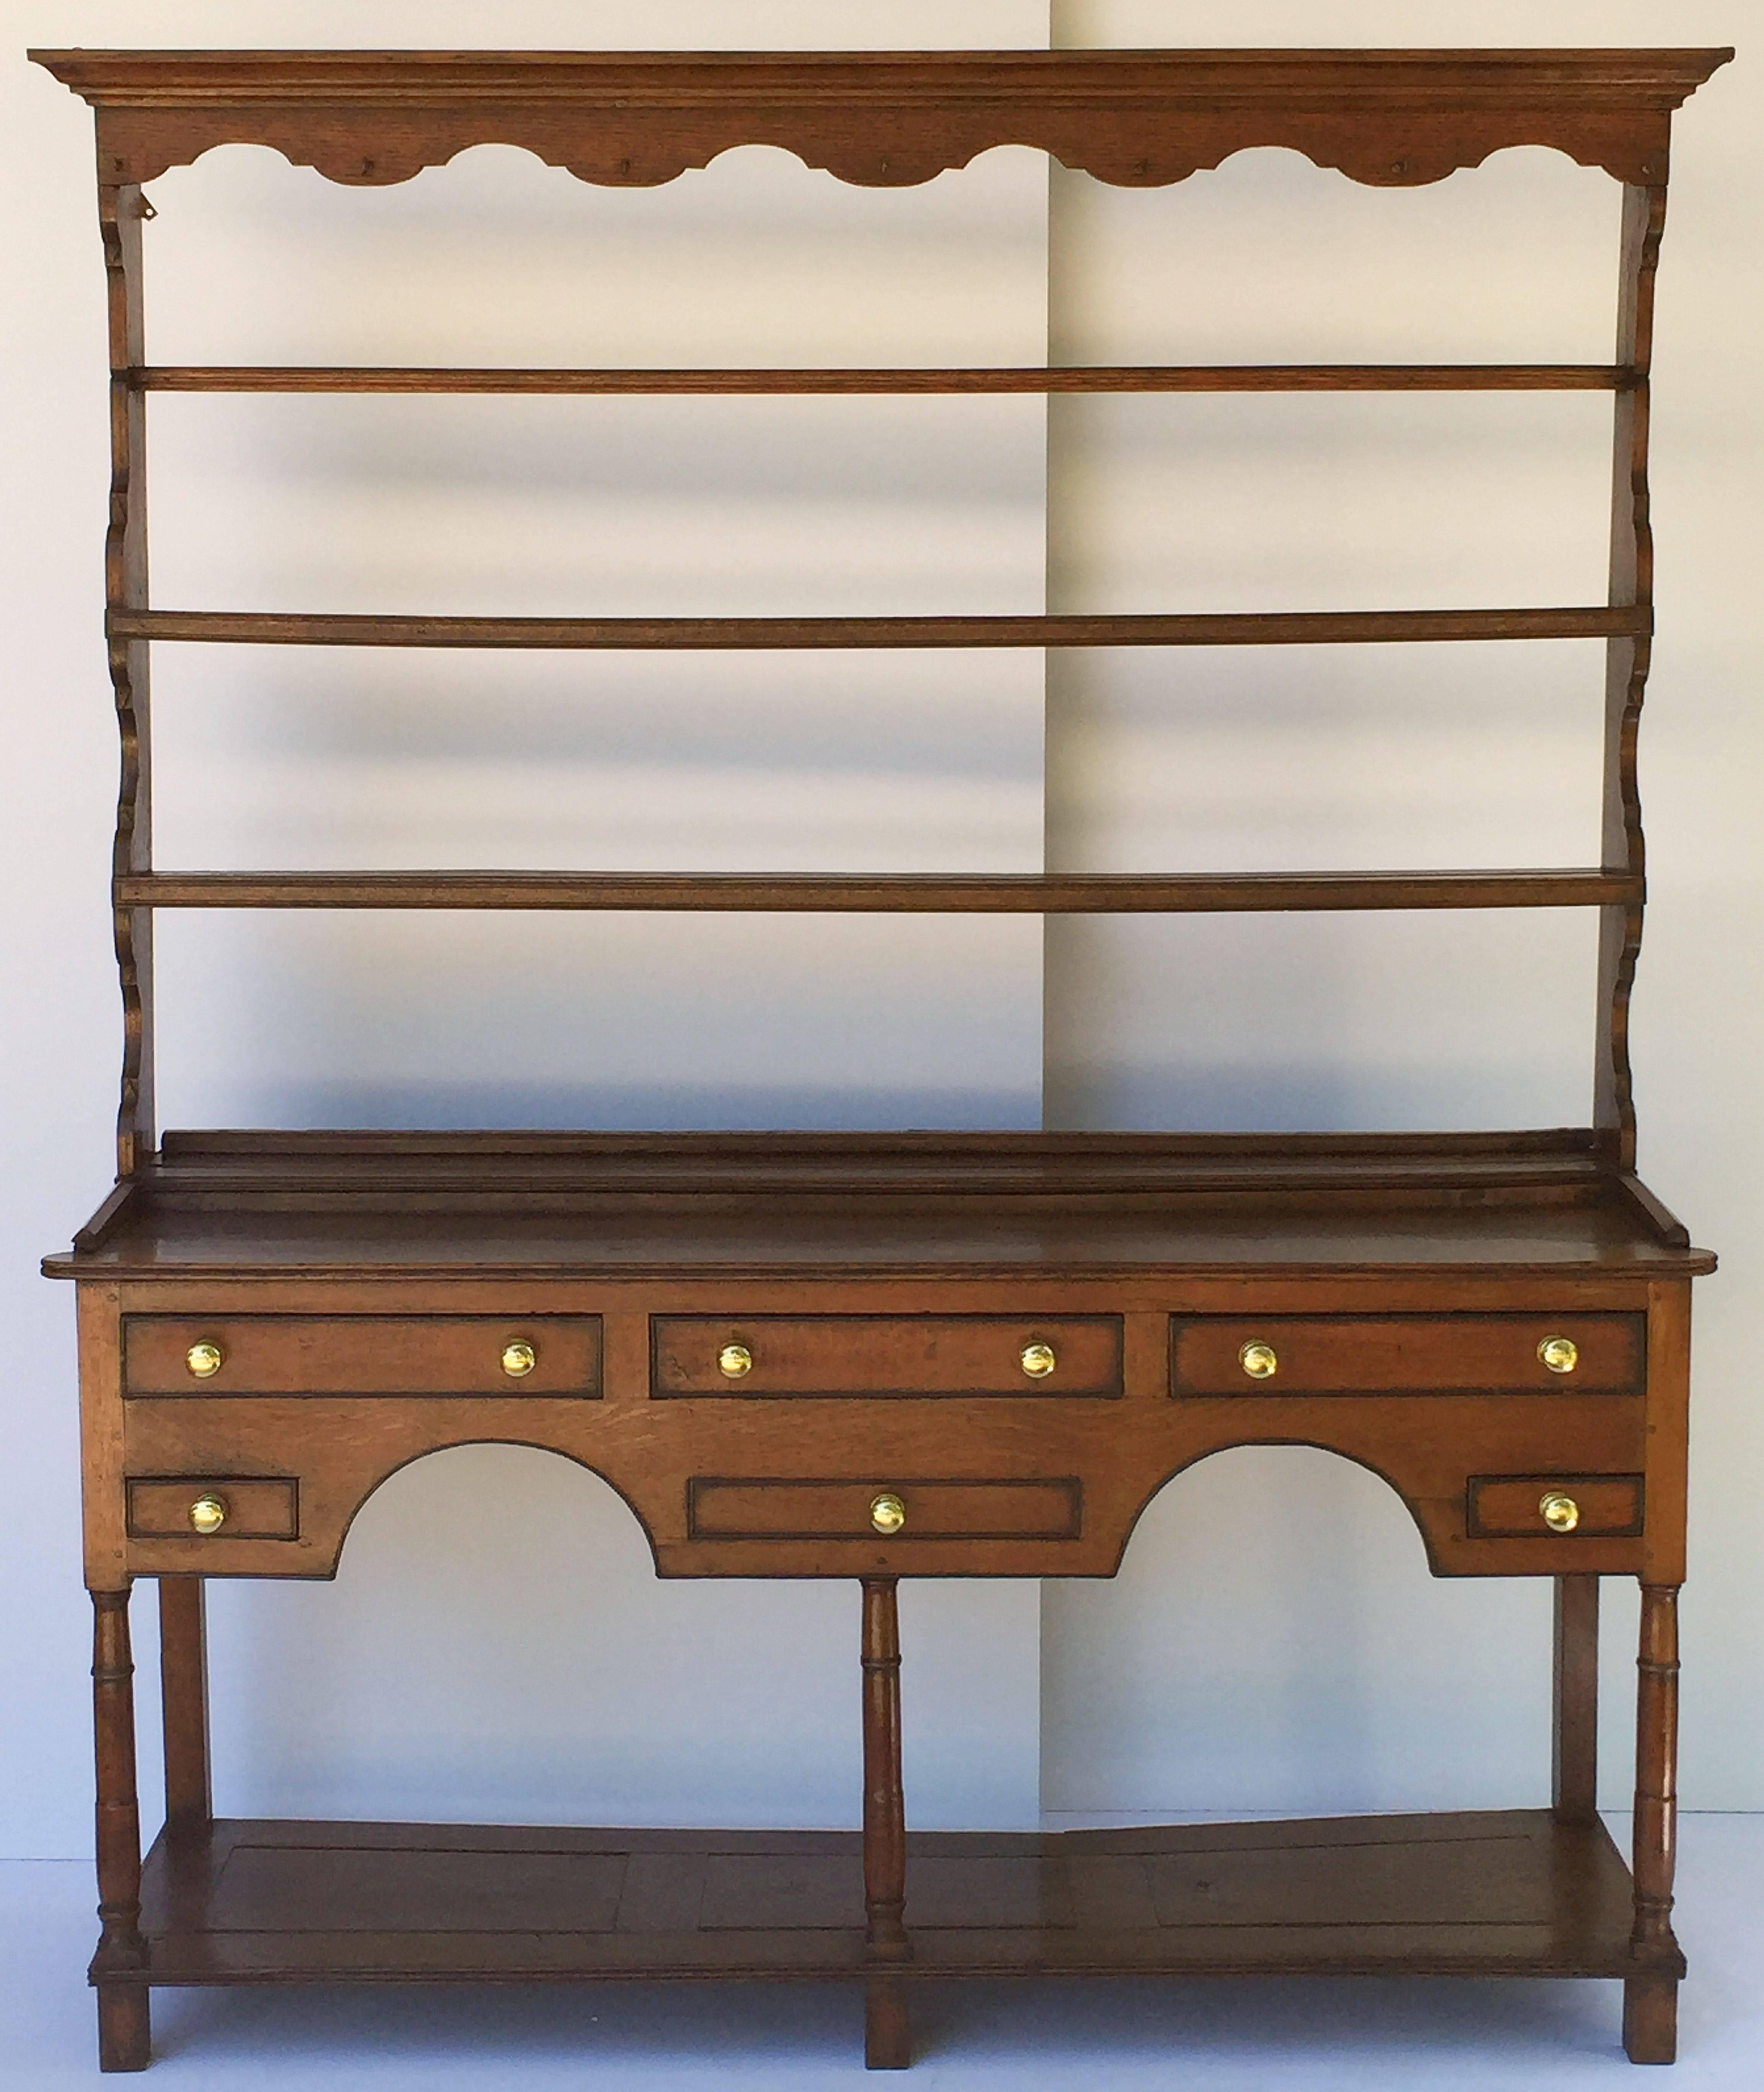 A handsome Welsh country pot board dresser of oak featuring a moulded crown top with ogee apron, over a plate rack with grooved plate rail and ogee sides.

Mounted to a dresser base frieze with five working drawers and one faux drawers, each